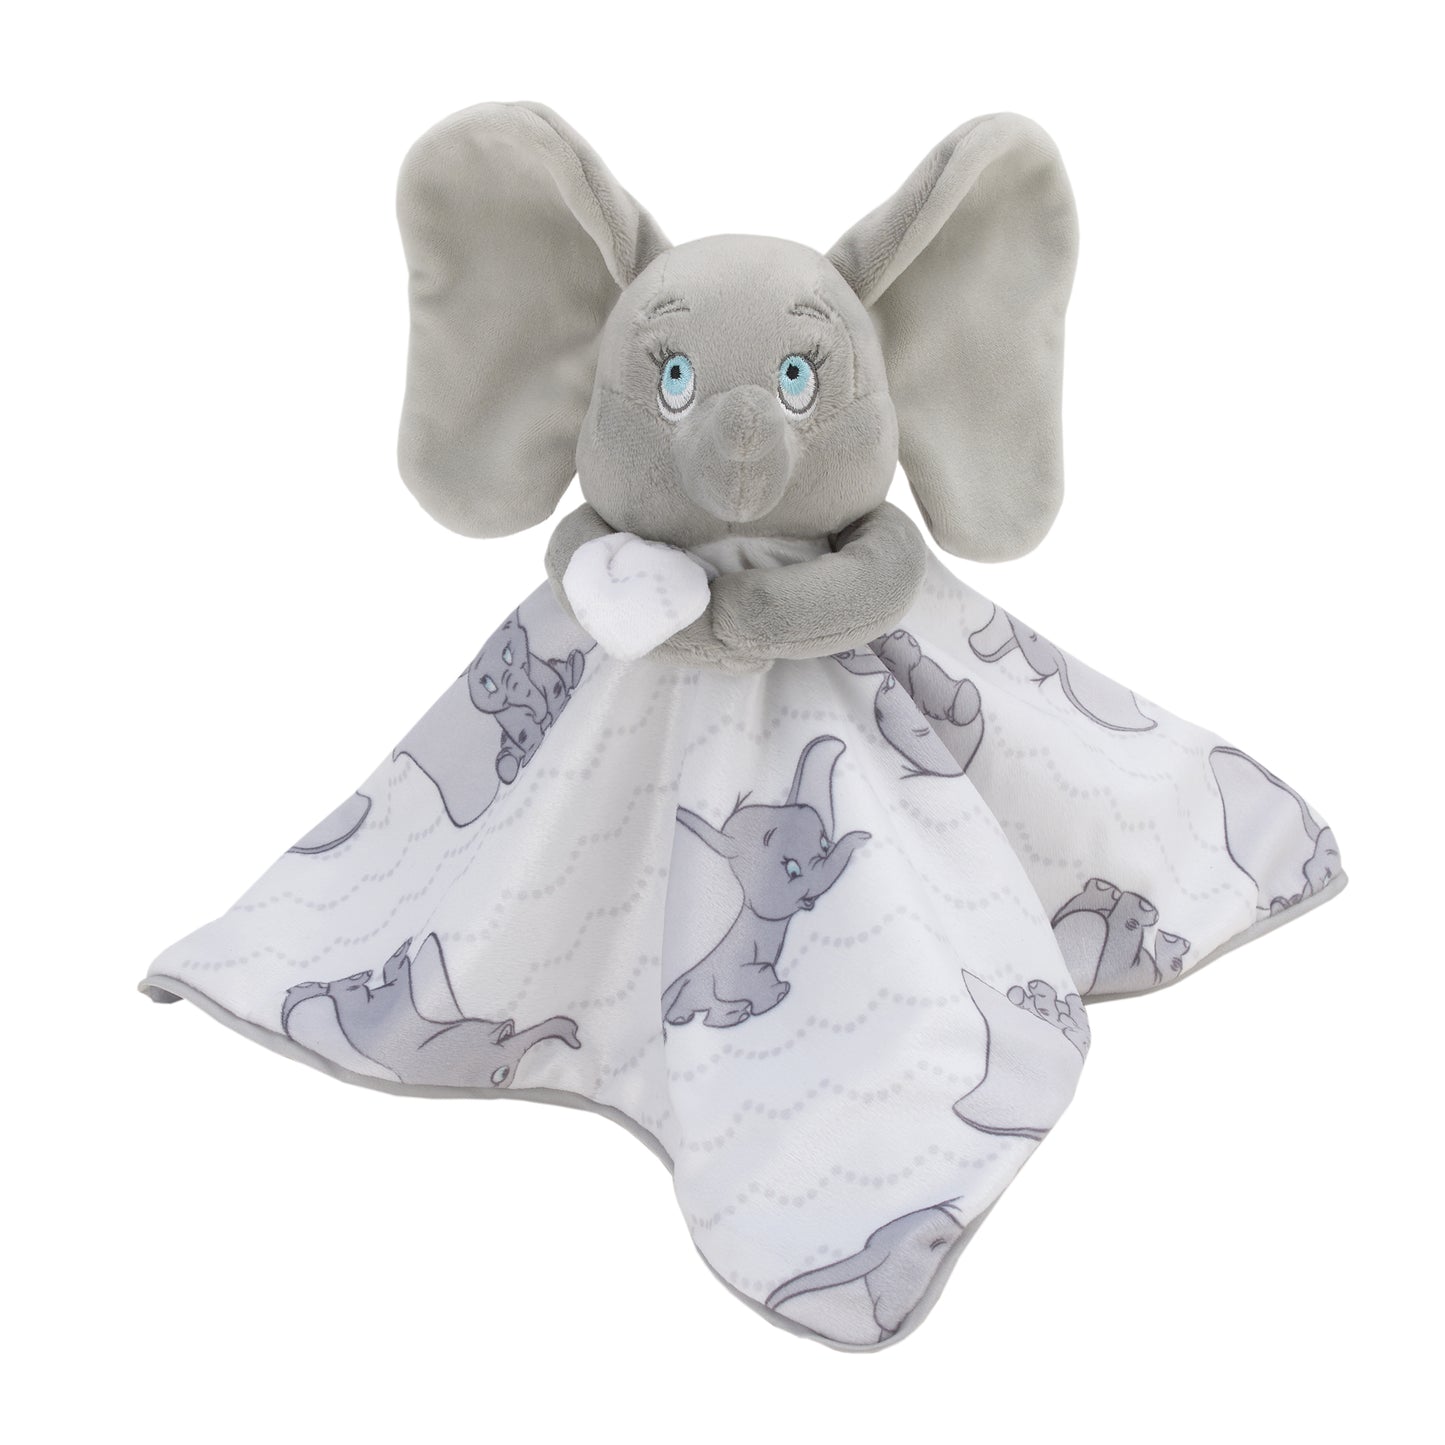 Disney Dumbo White and Grey Lovey Security Blanket